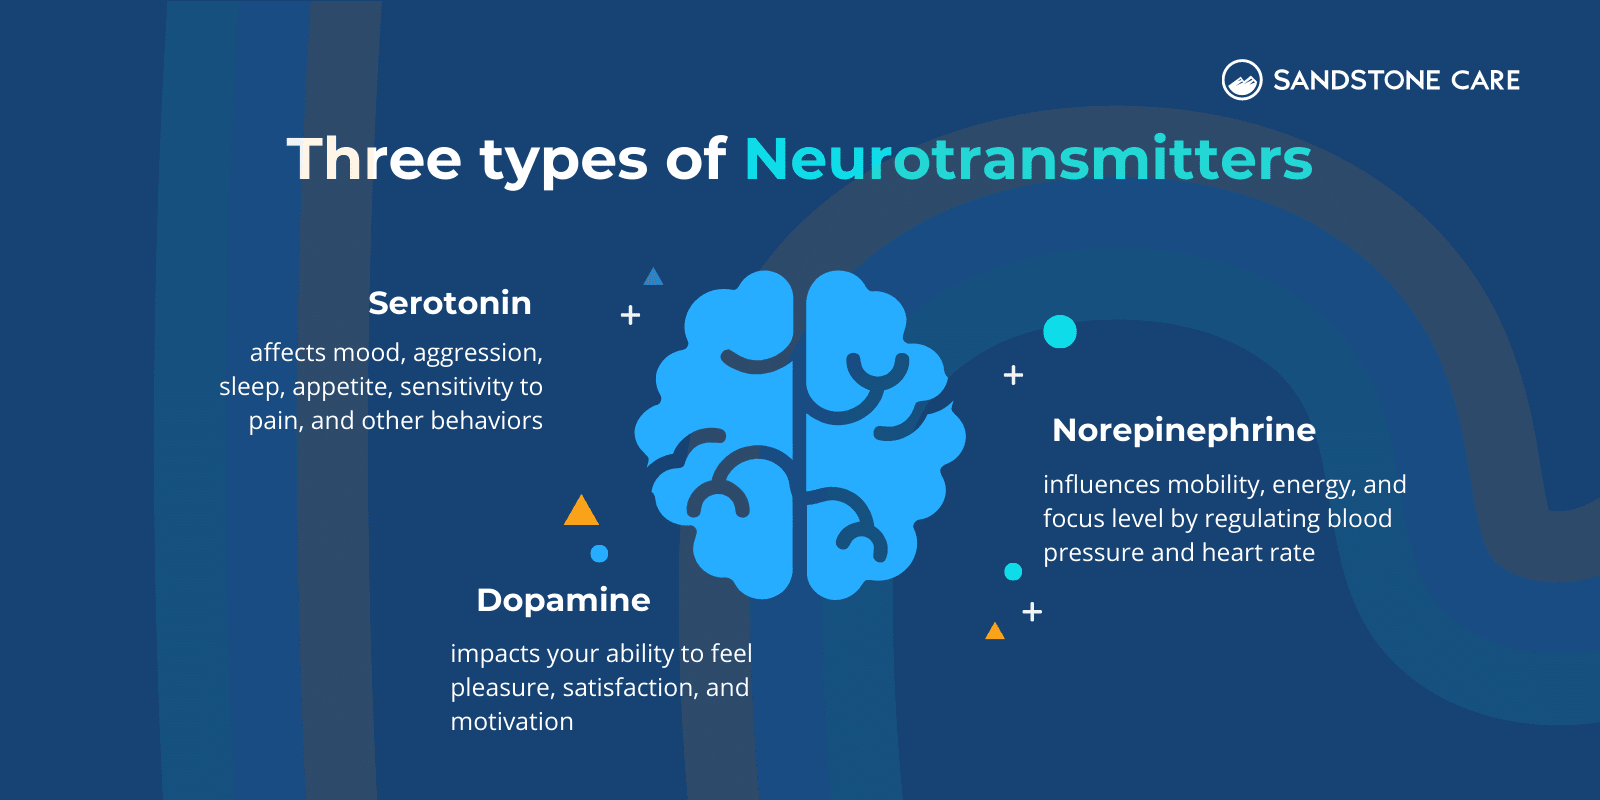 "Three Types Of Neurotransmitters" and "Serotonin, Dopamine, Norepinephrine" are written and explained around a digital graphic of a brain